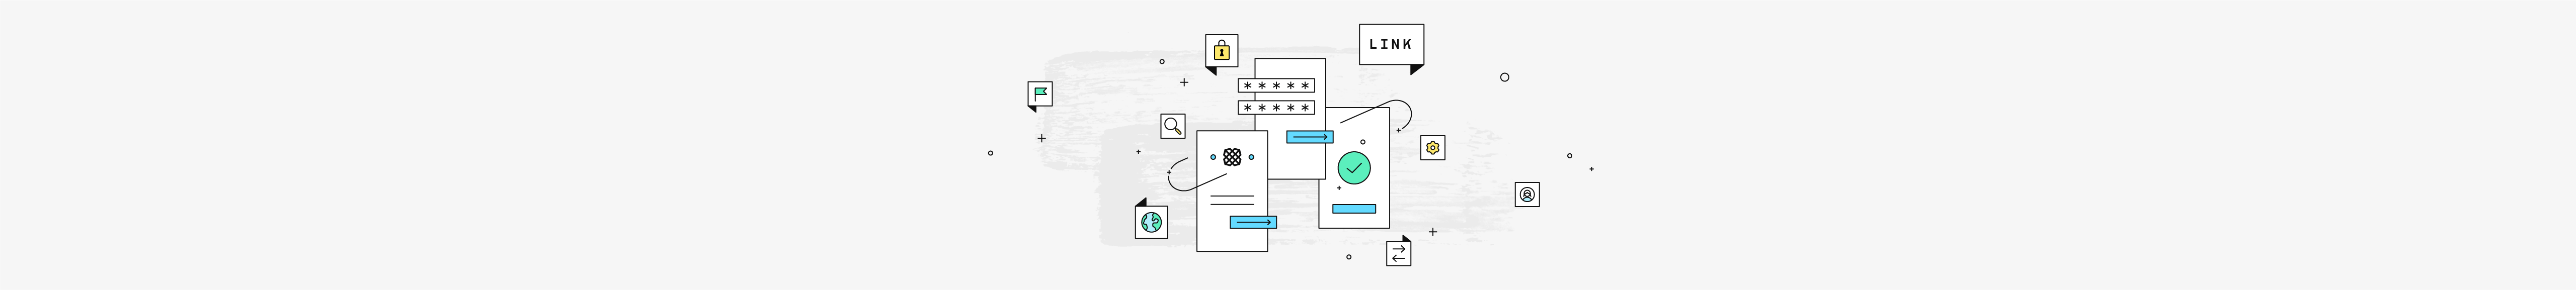 Introducing Link tokens and Link event logs banner